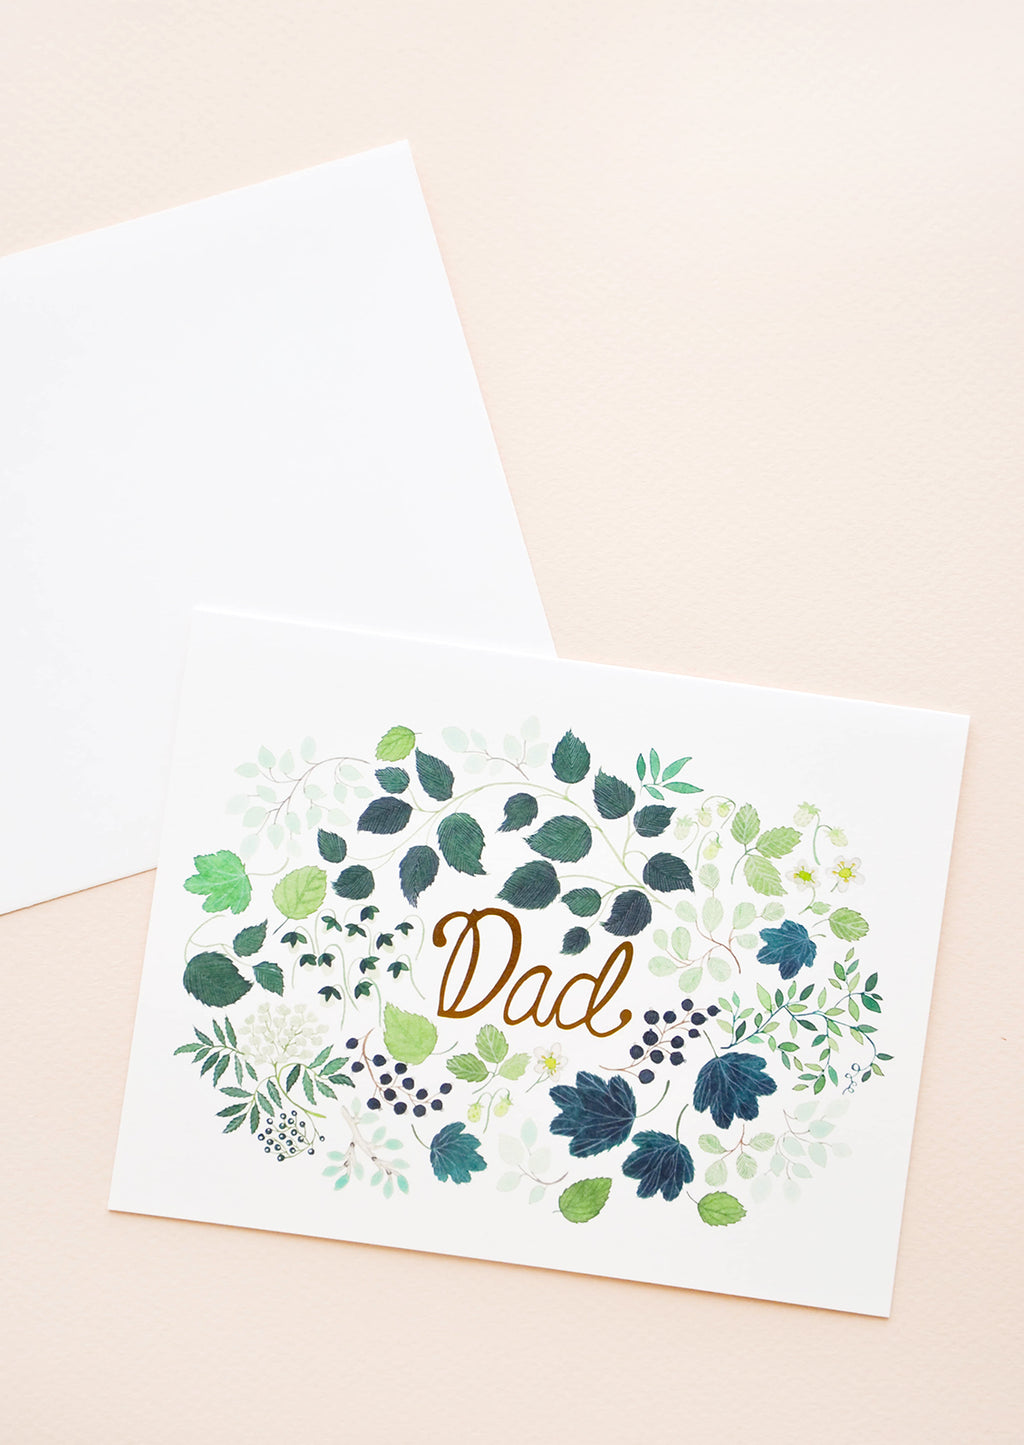 1: Greeting card with green floral print frame around "Dad" printed in gold text